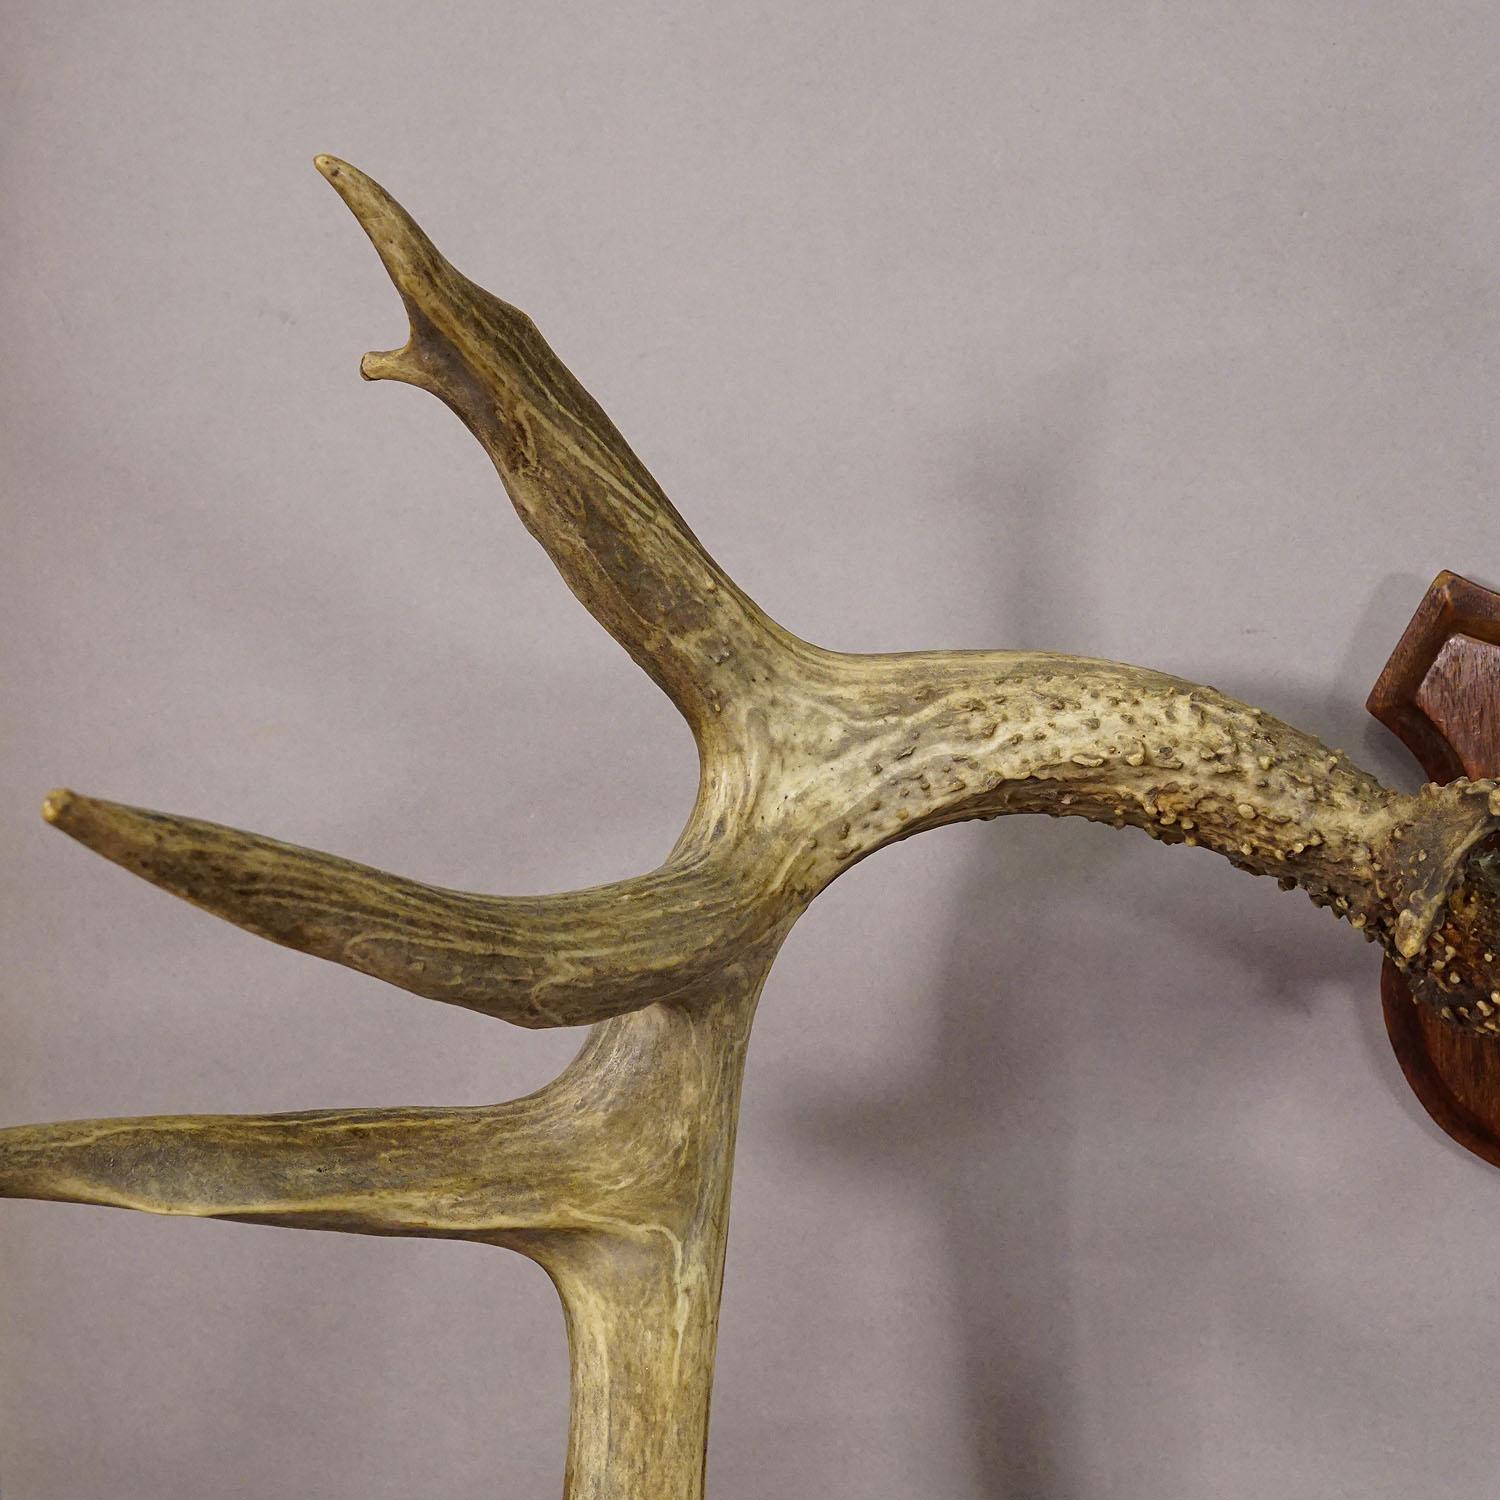 20th Century Large White Tailed Deer Trophy Mount on Wooden Plaque ca. 1900s For Sale